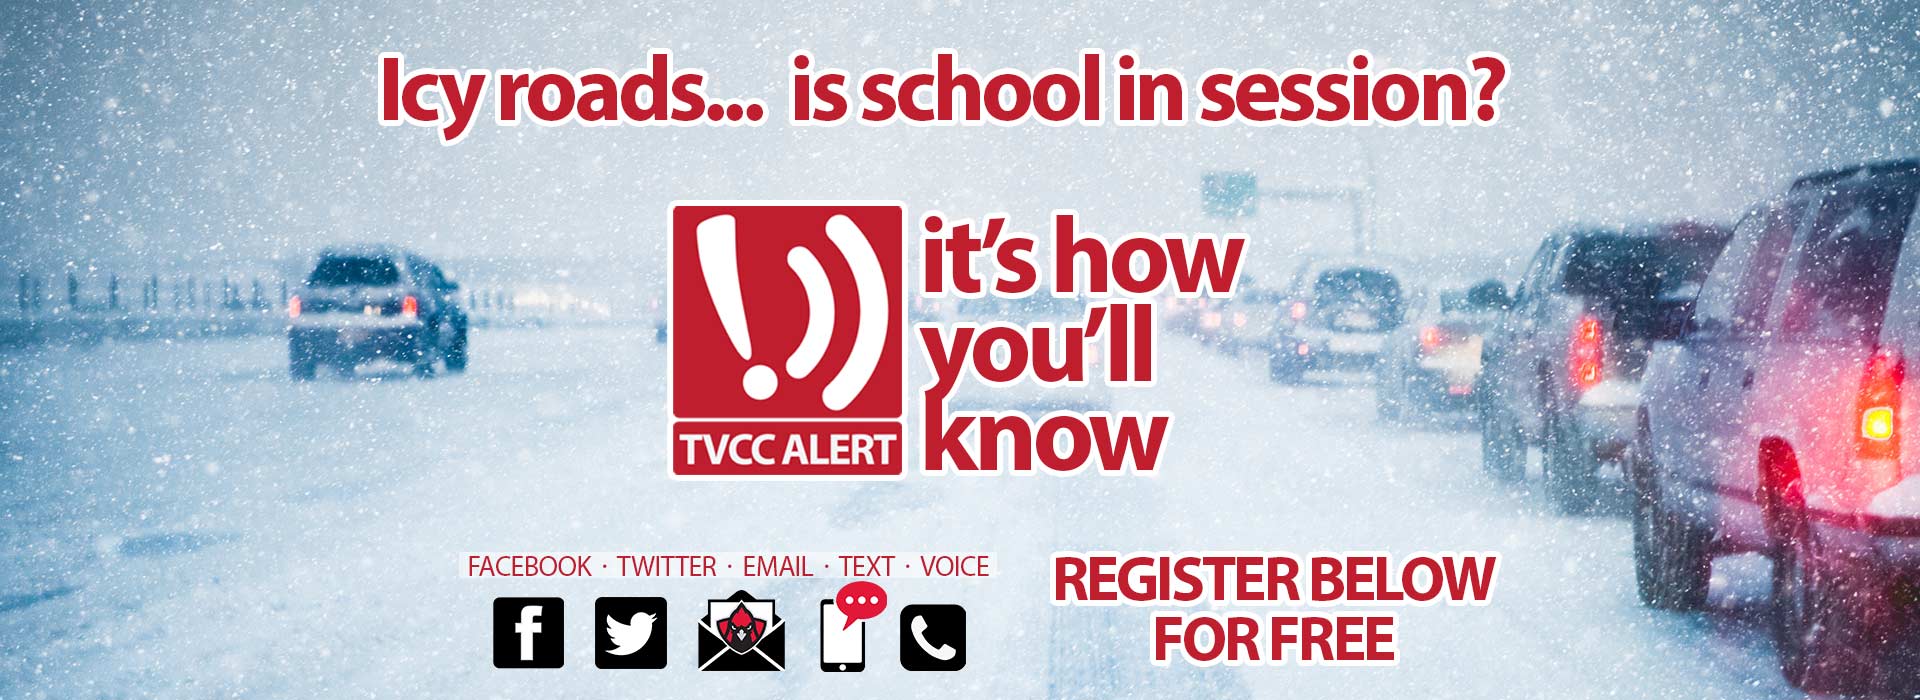 Icy roads... is school in session?  TVCC ALERT - It's how you'll know.  Register below for free.